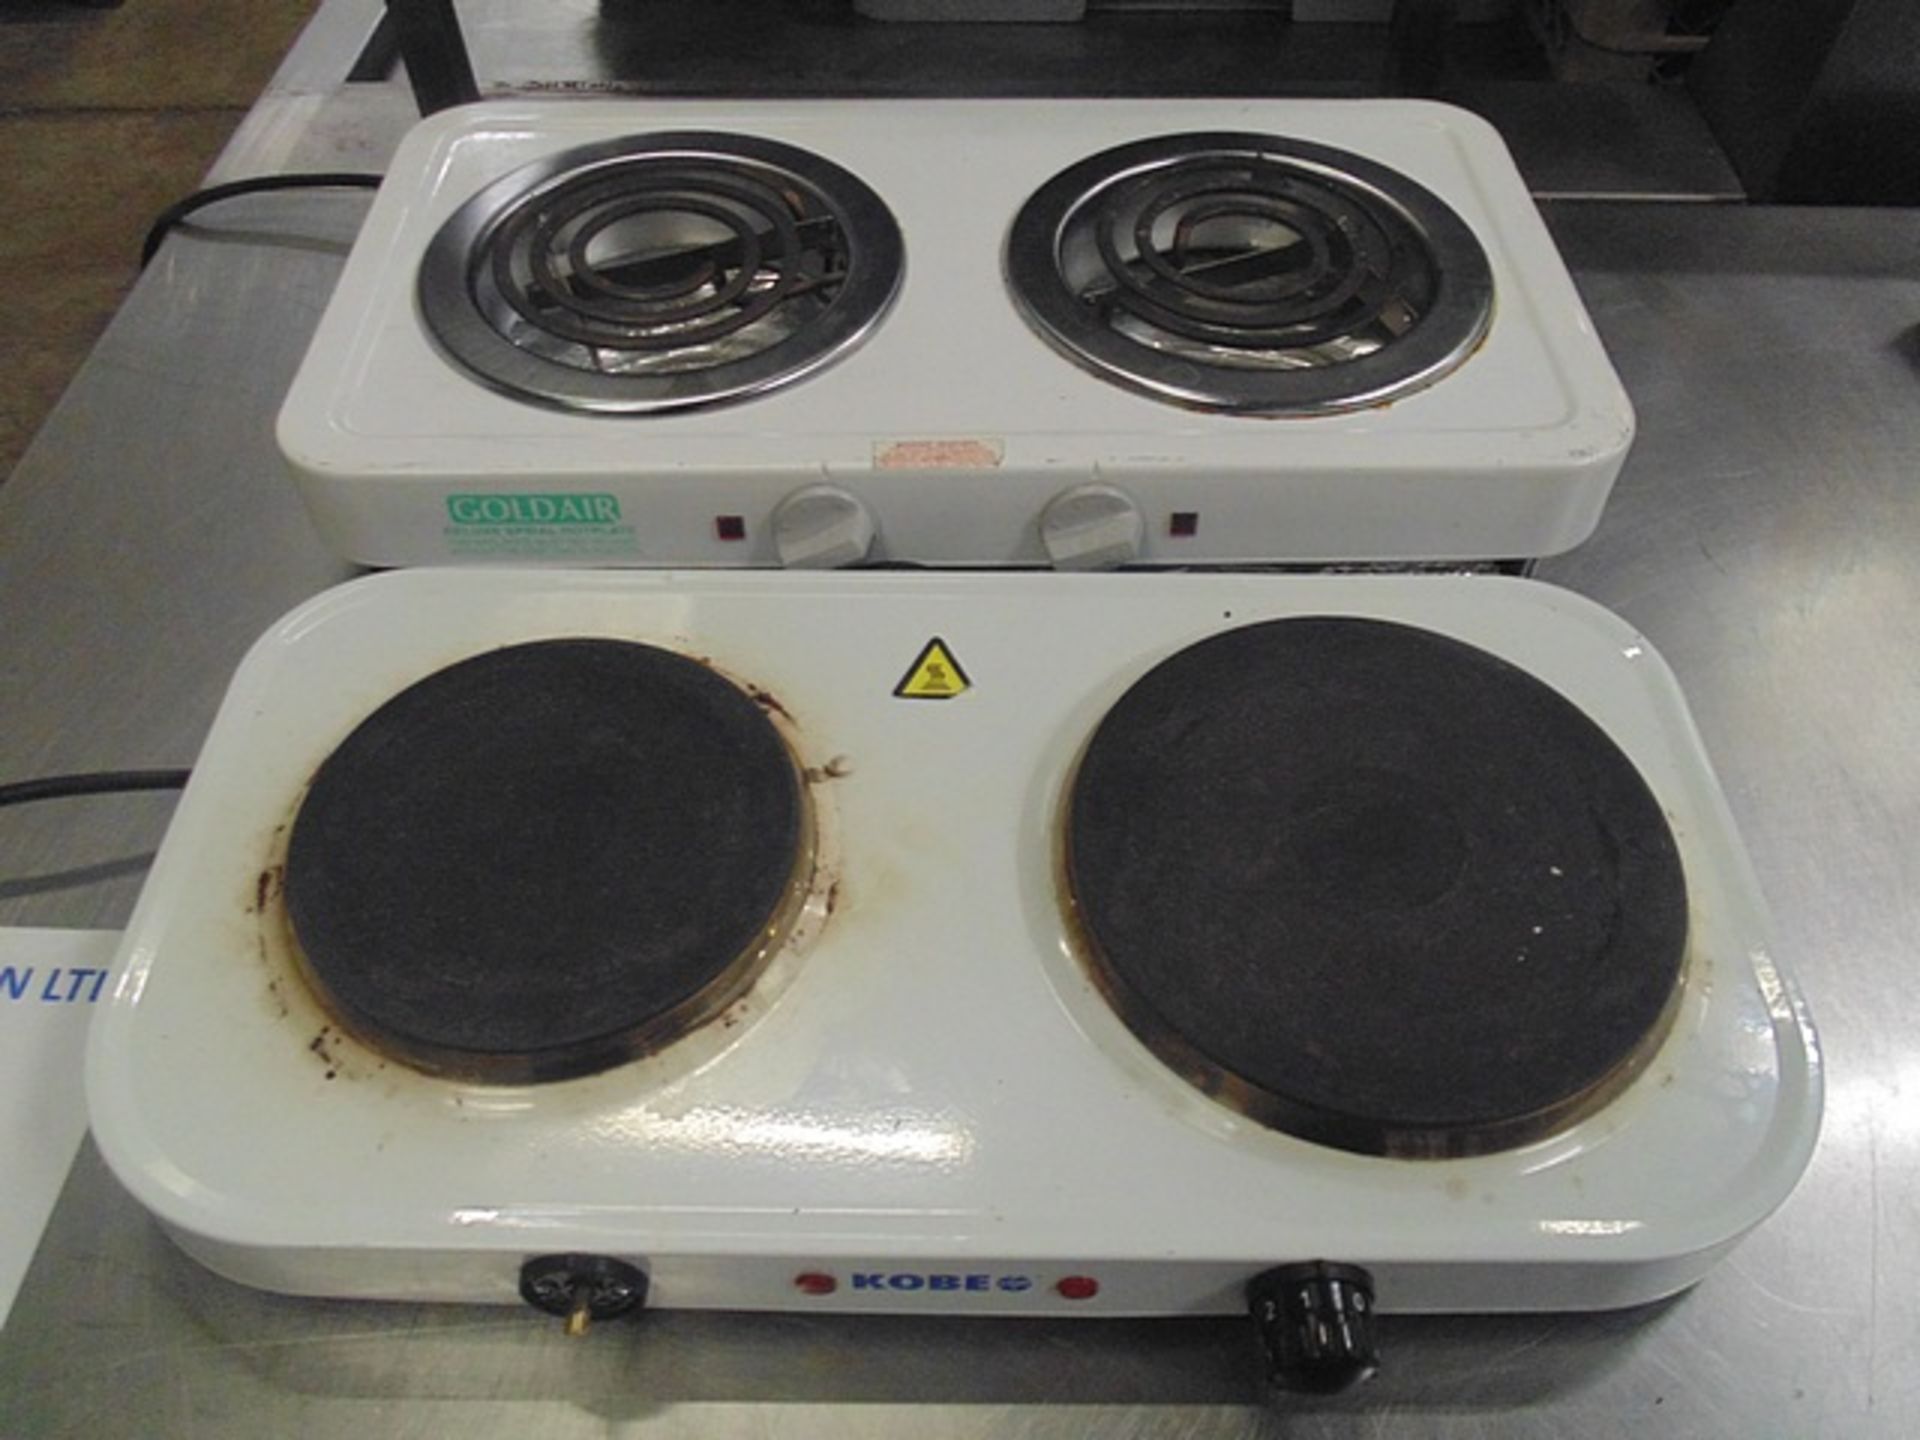 Kobe HPD250 portable twin hob hotplate table top 1.5 kW+1kW with a Goldair twin hob table top